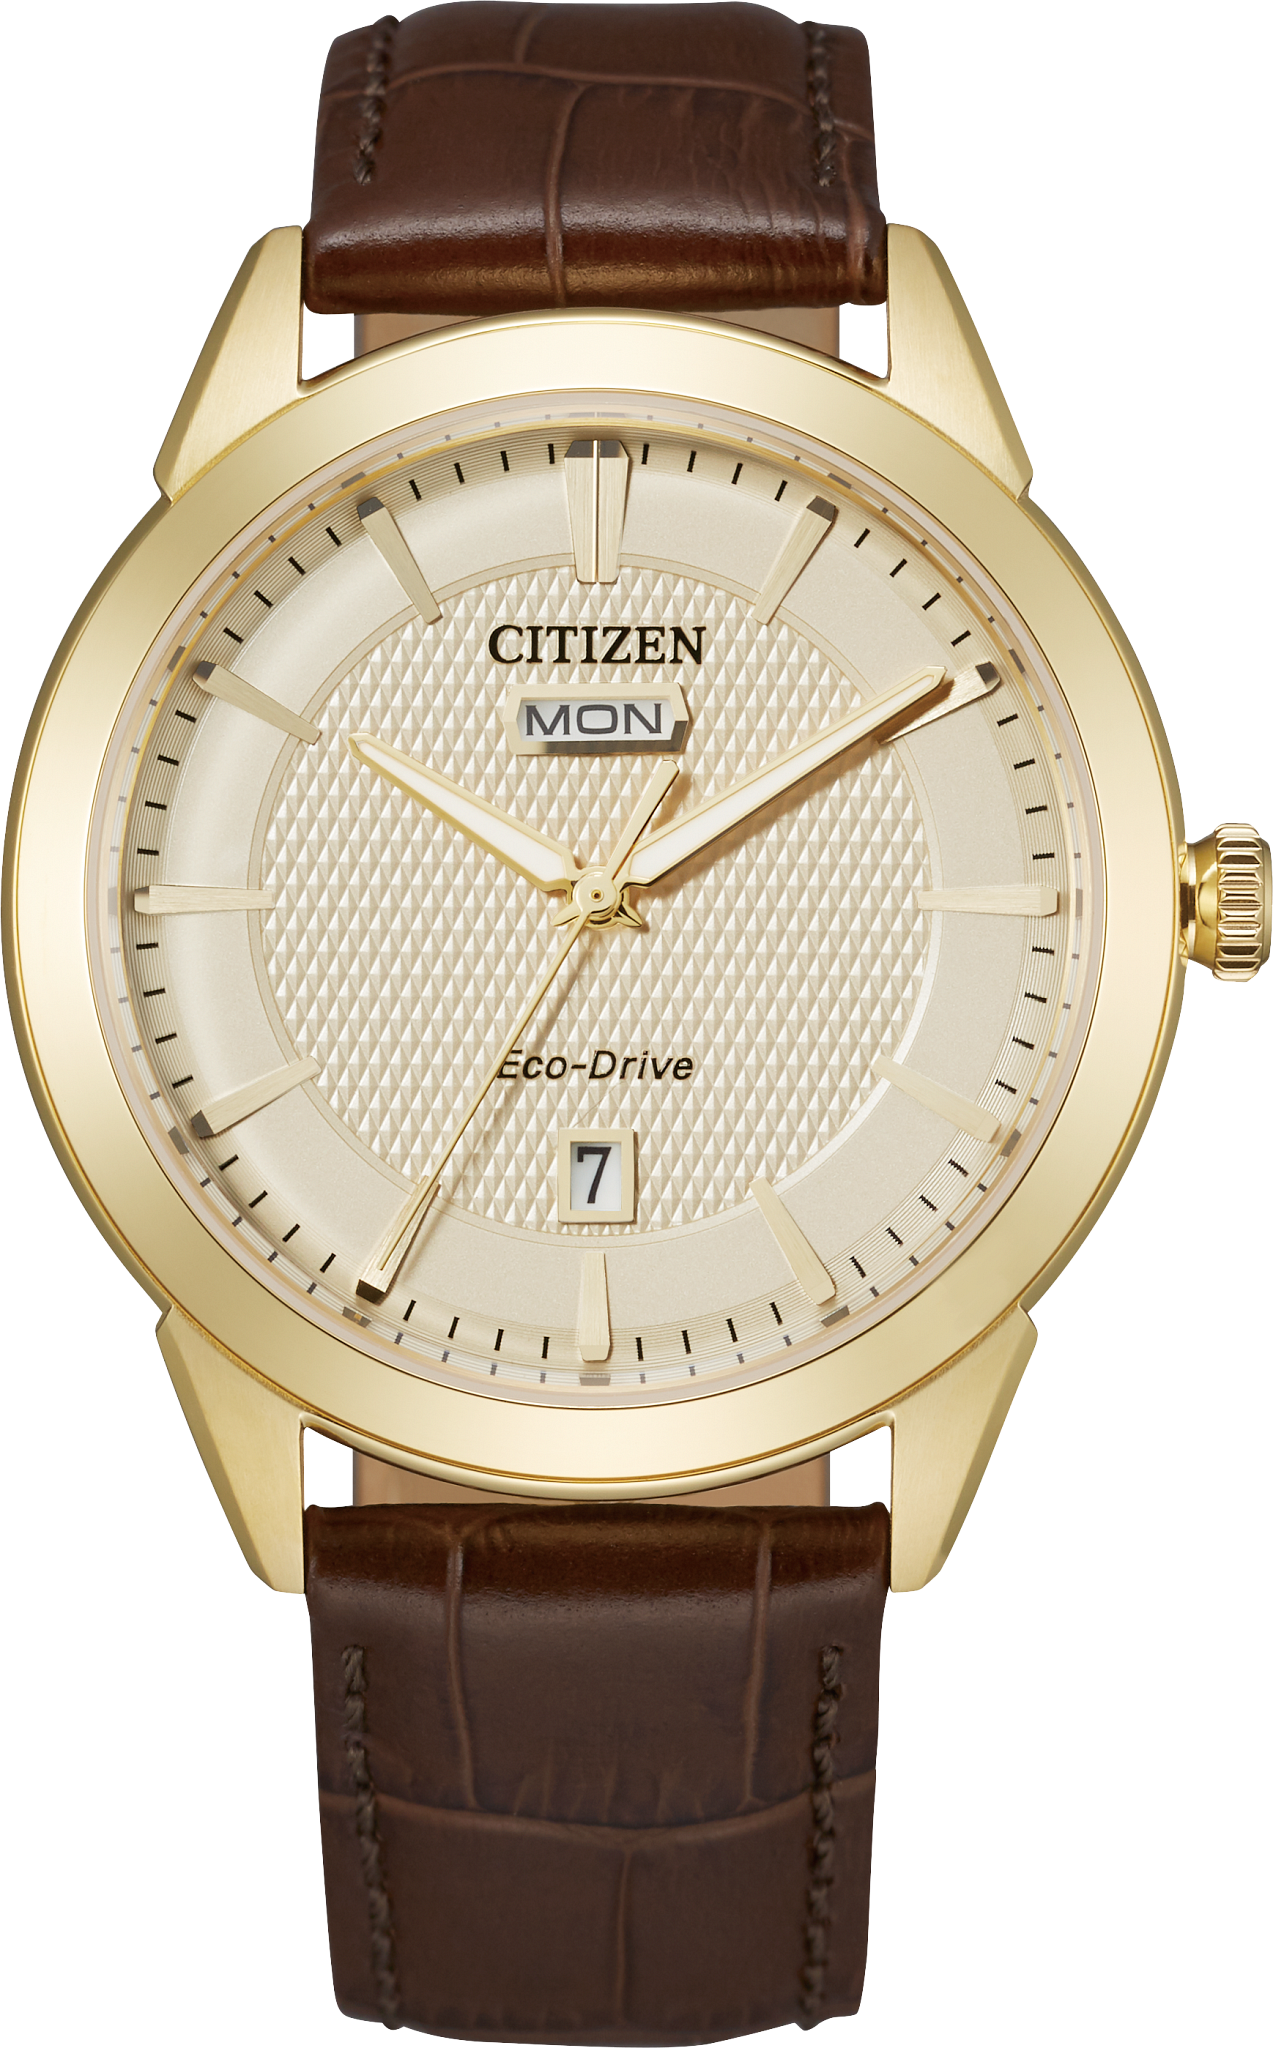 2,211 Citizen Watch Royalty-Free Photos and Stock Images | Shutterstock